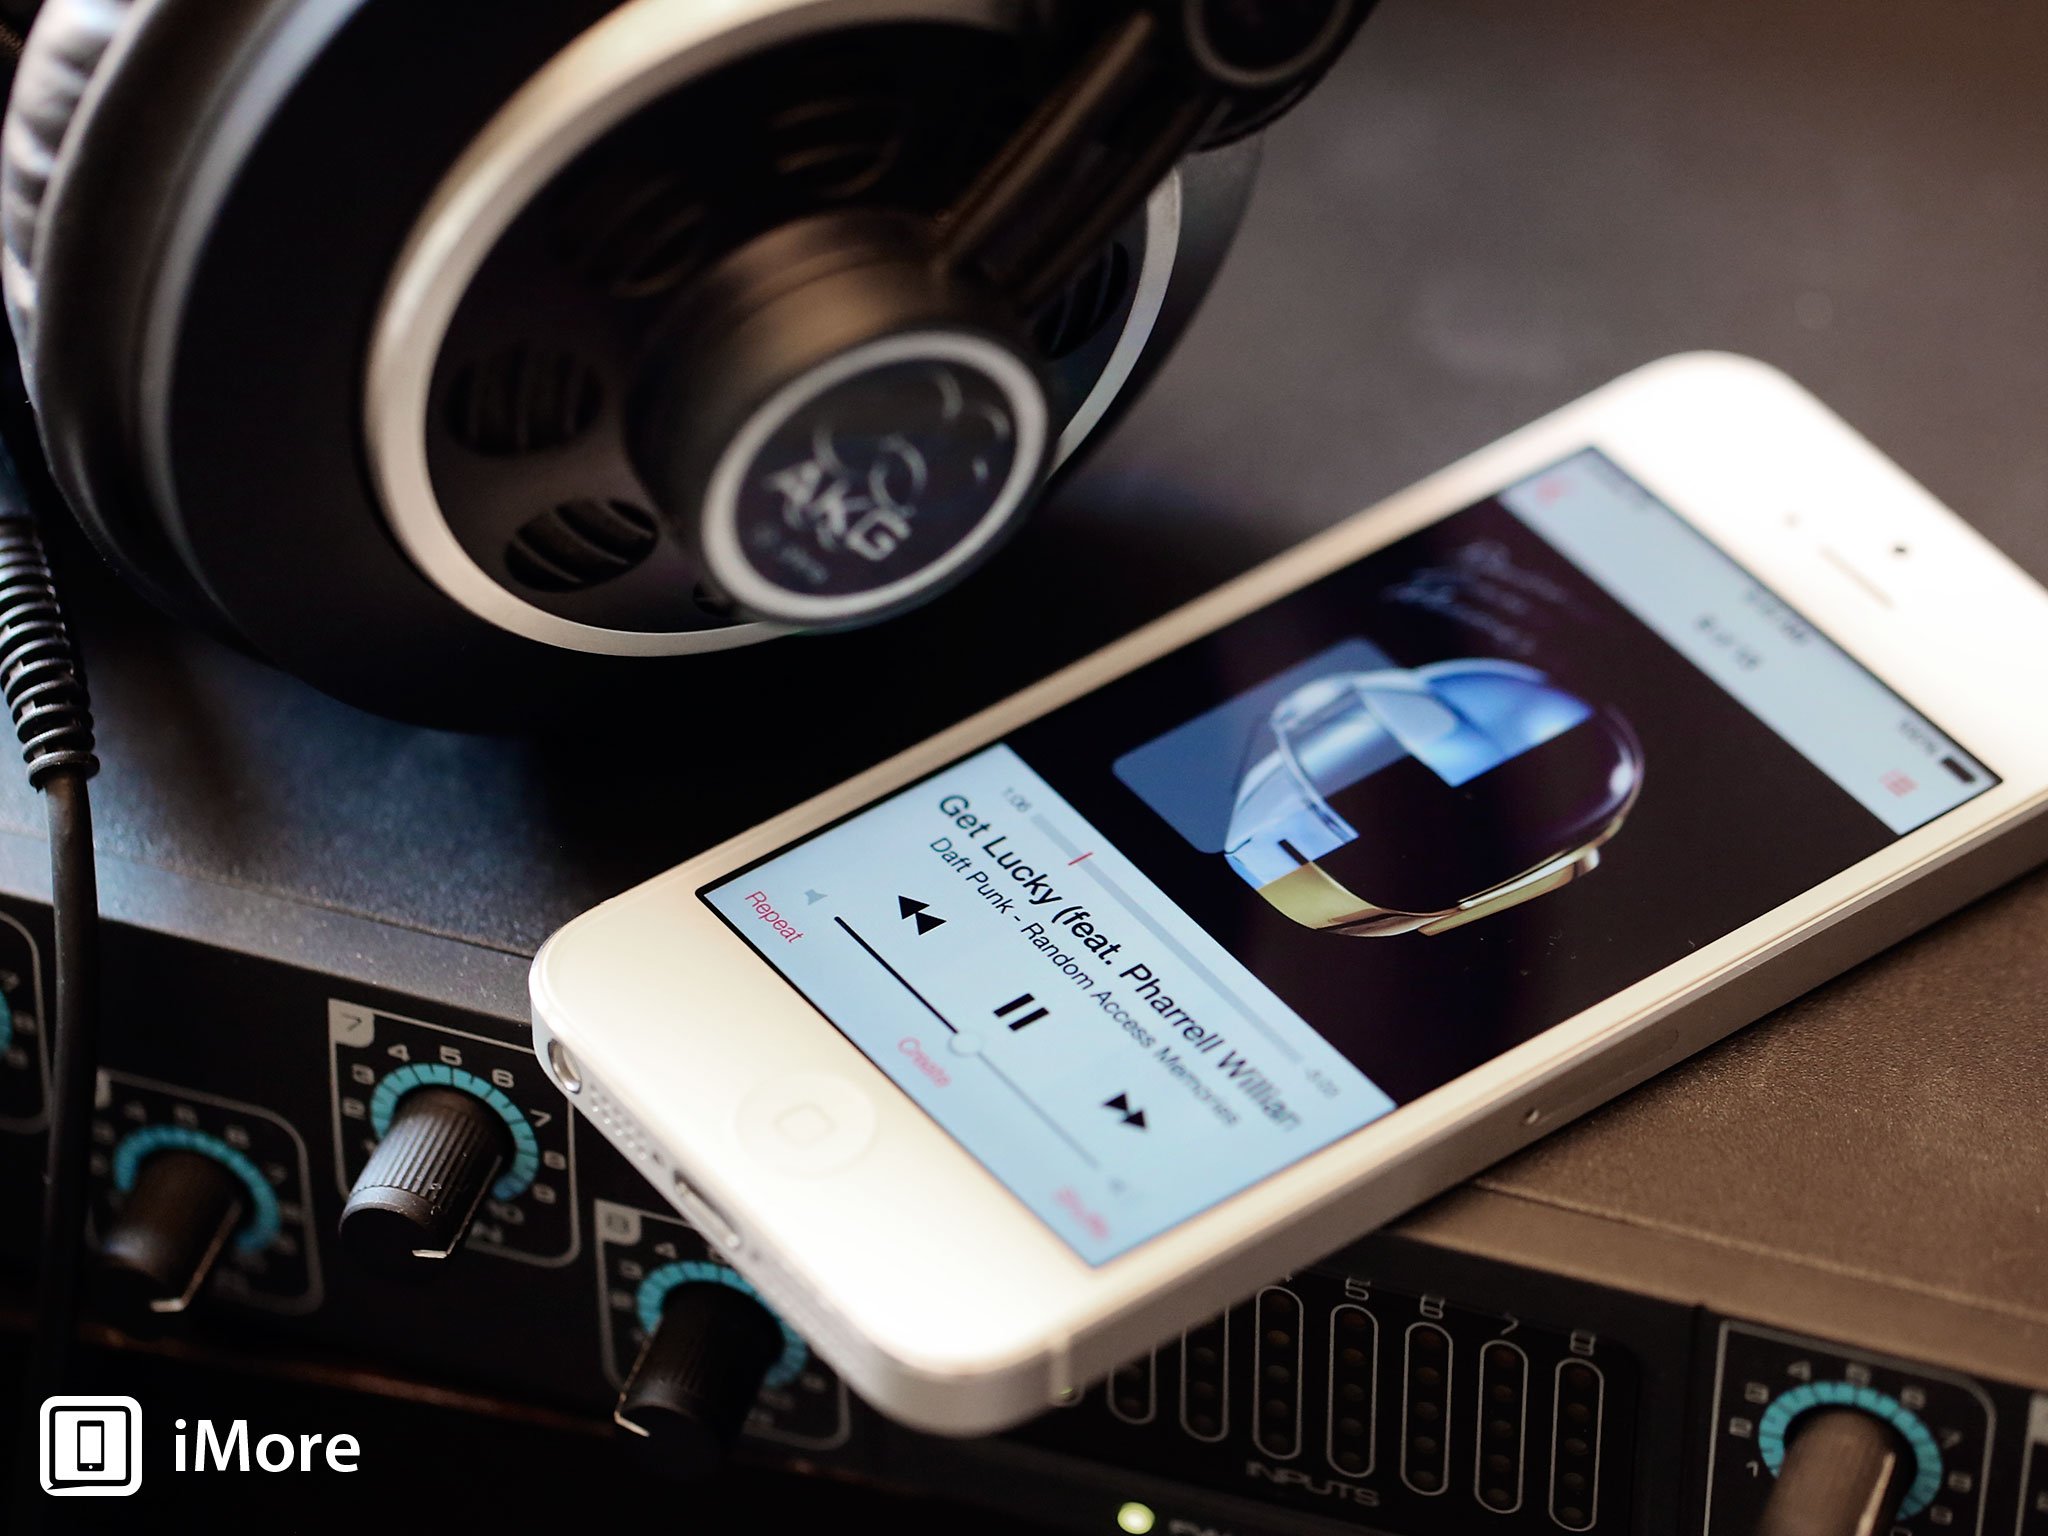 iOS 7 preview: Inter-App Audio isn't contracts or intents, but is a start